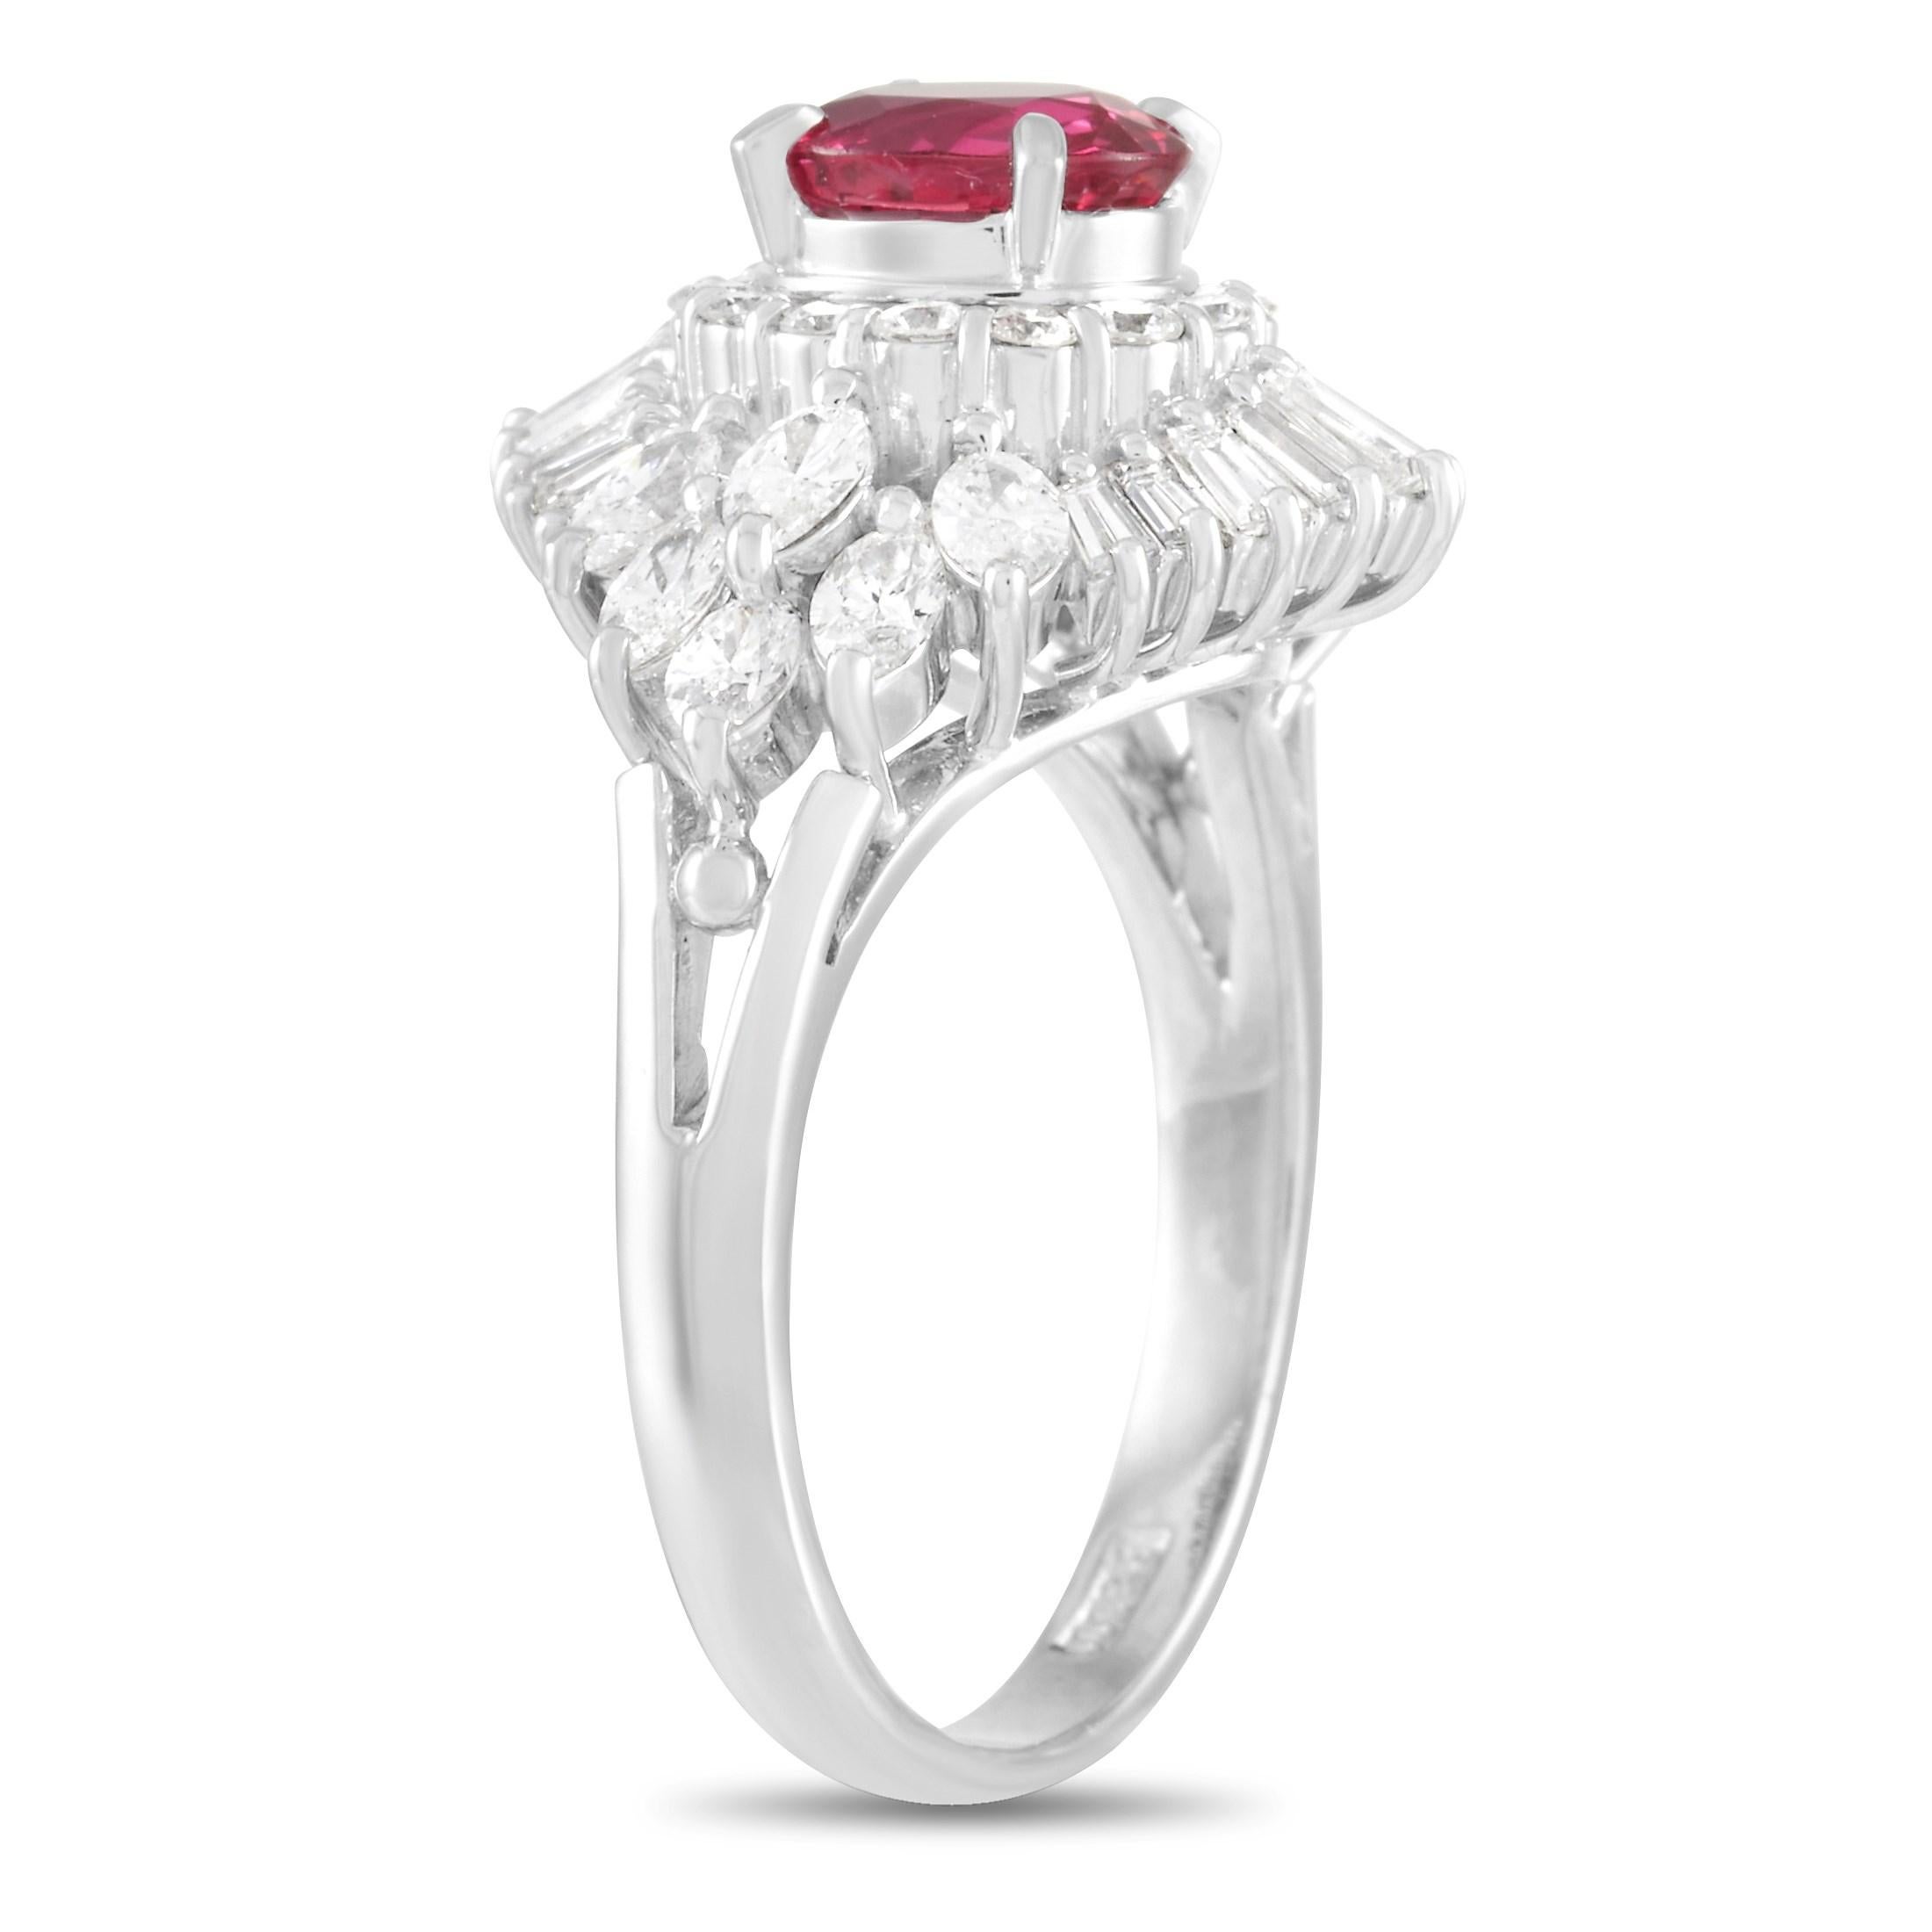 This bold LB Exclusive Platinum 1.30 ct Diamond 1.08 ct Ruby Ring is a glamorous statement piece made with platinum. The front of the ring is set with a total of 1.30 carats of round cut, marquise cut, and emerald cut diamonds, forming a